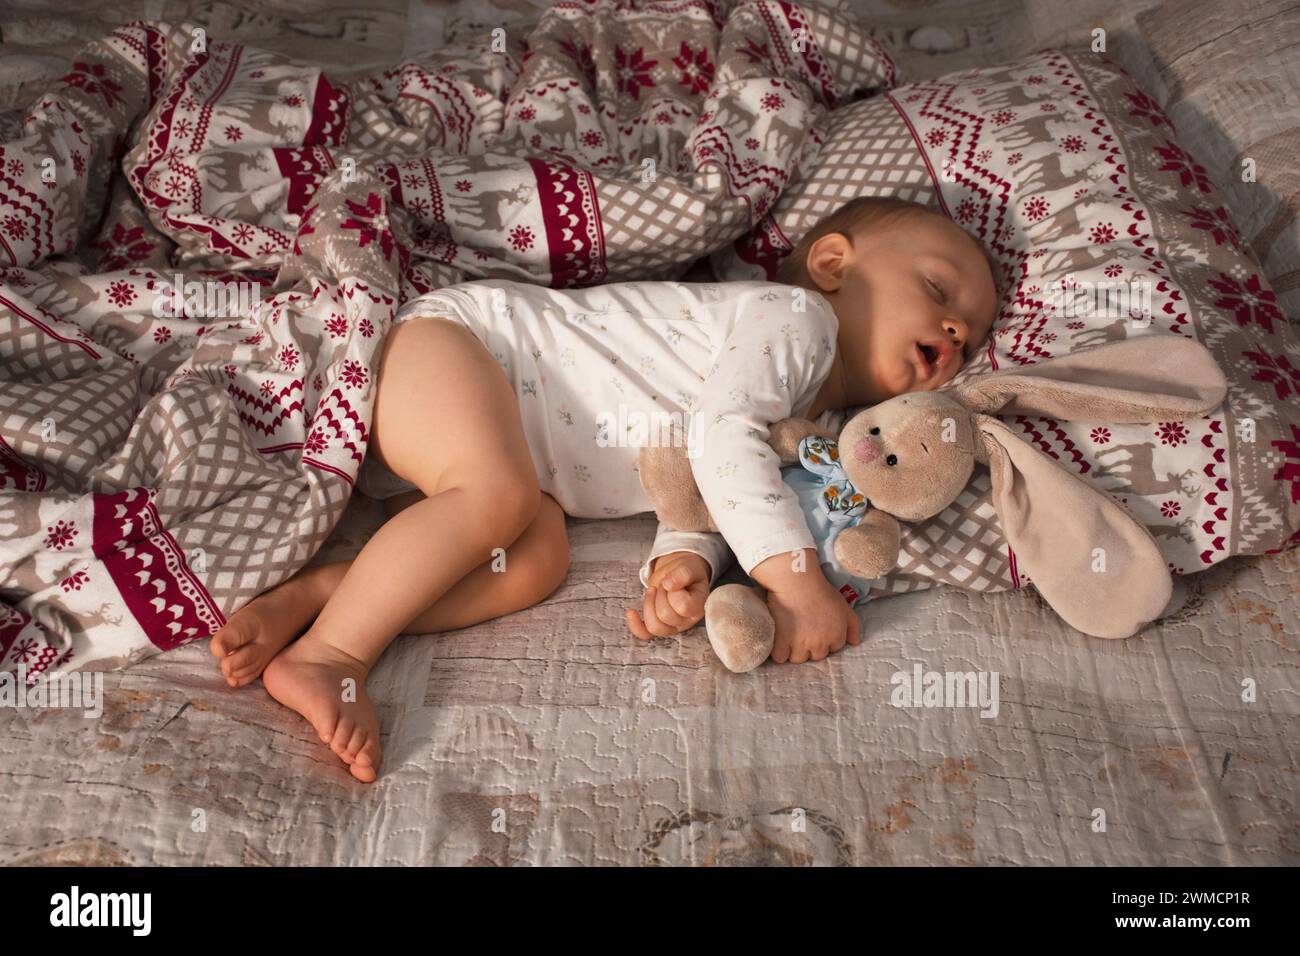 baby sleeps sweetly, breathes through his mouth, hugging a soft toy bunny on a Christmas bed Stock Photo